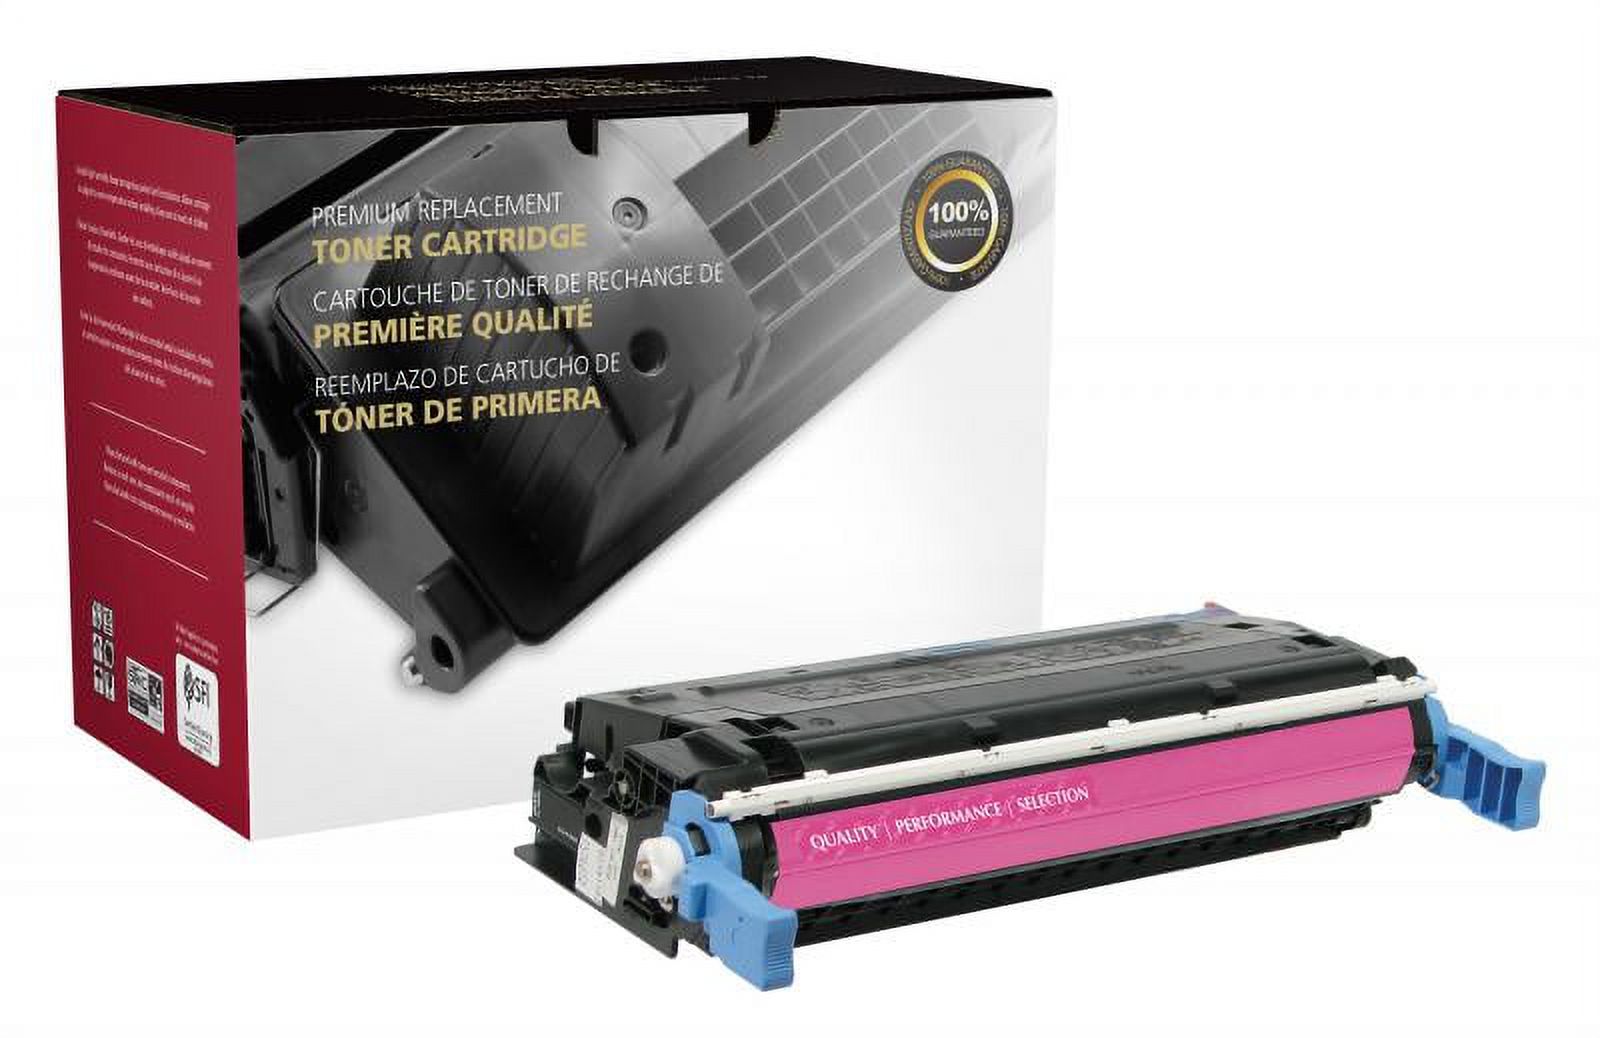 Remanufactured Toner Cartridge Alternative For HP 641A (C9723A) - image 1 of 2